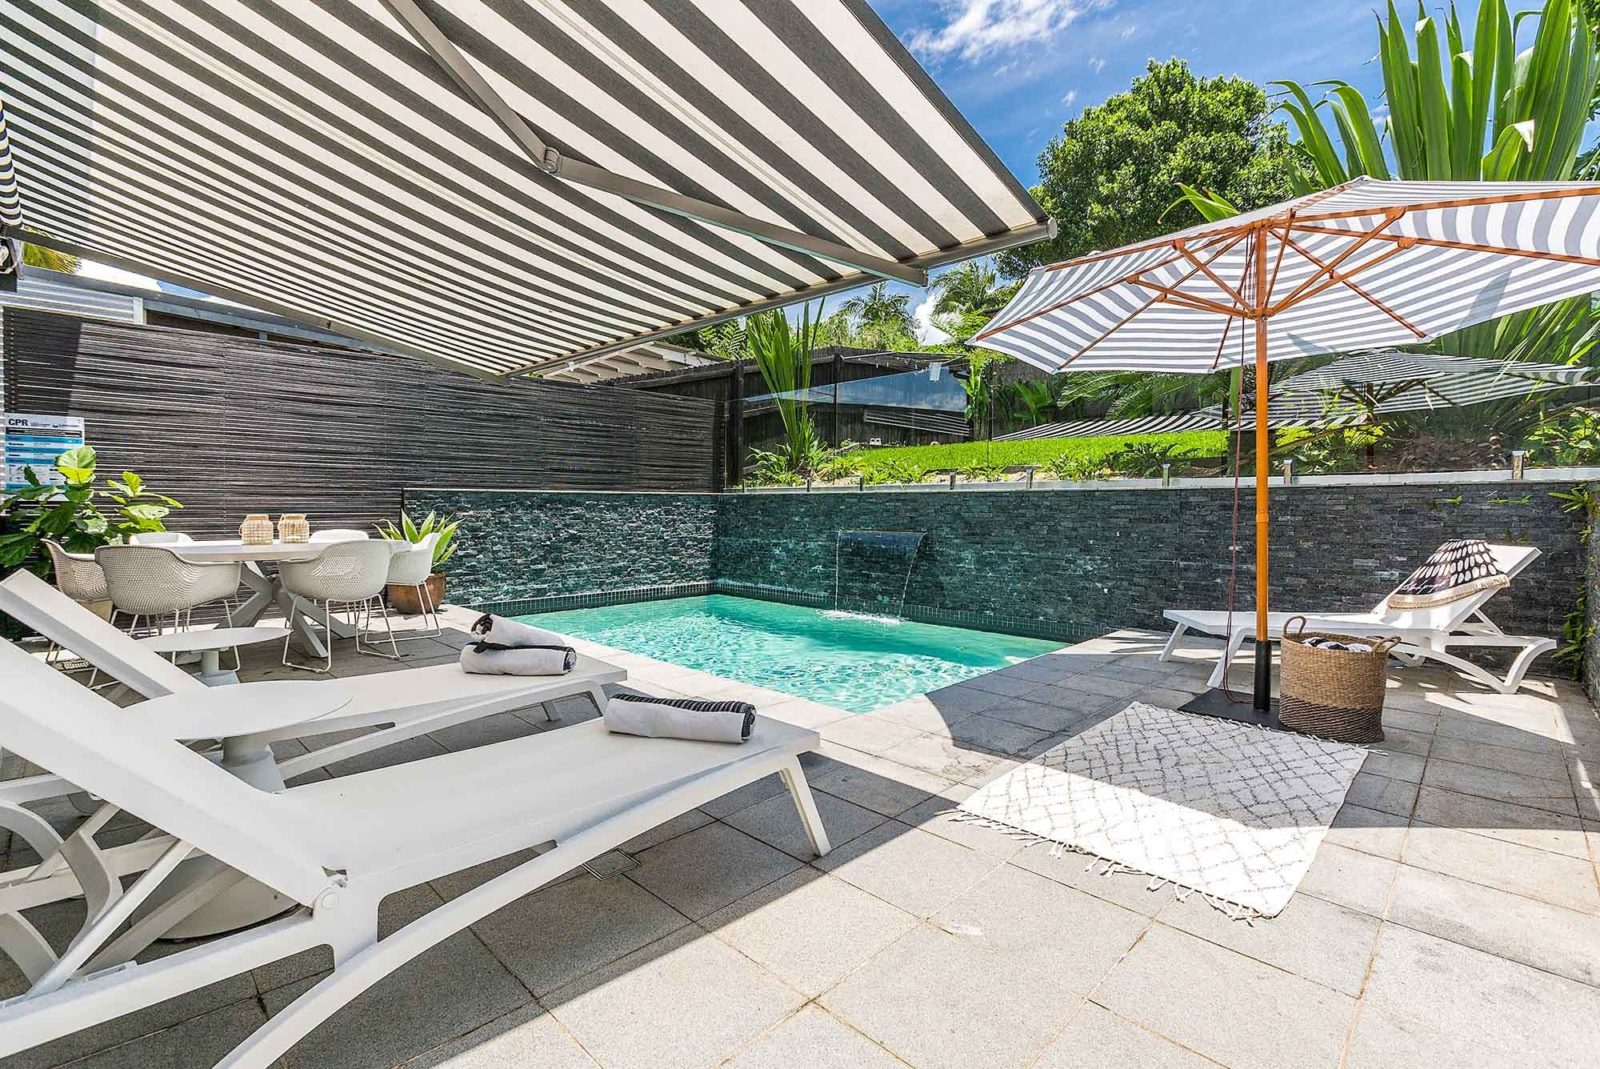 Bangalow Abode - Byron Bay - Pool and Lounge Chairs